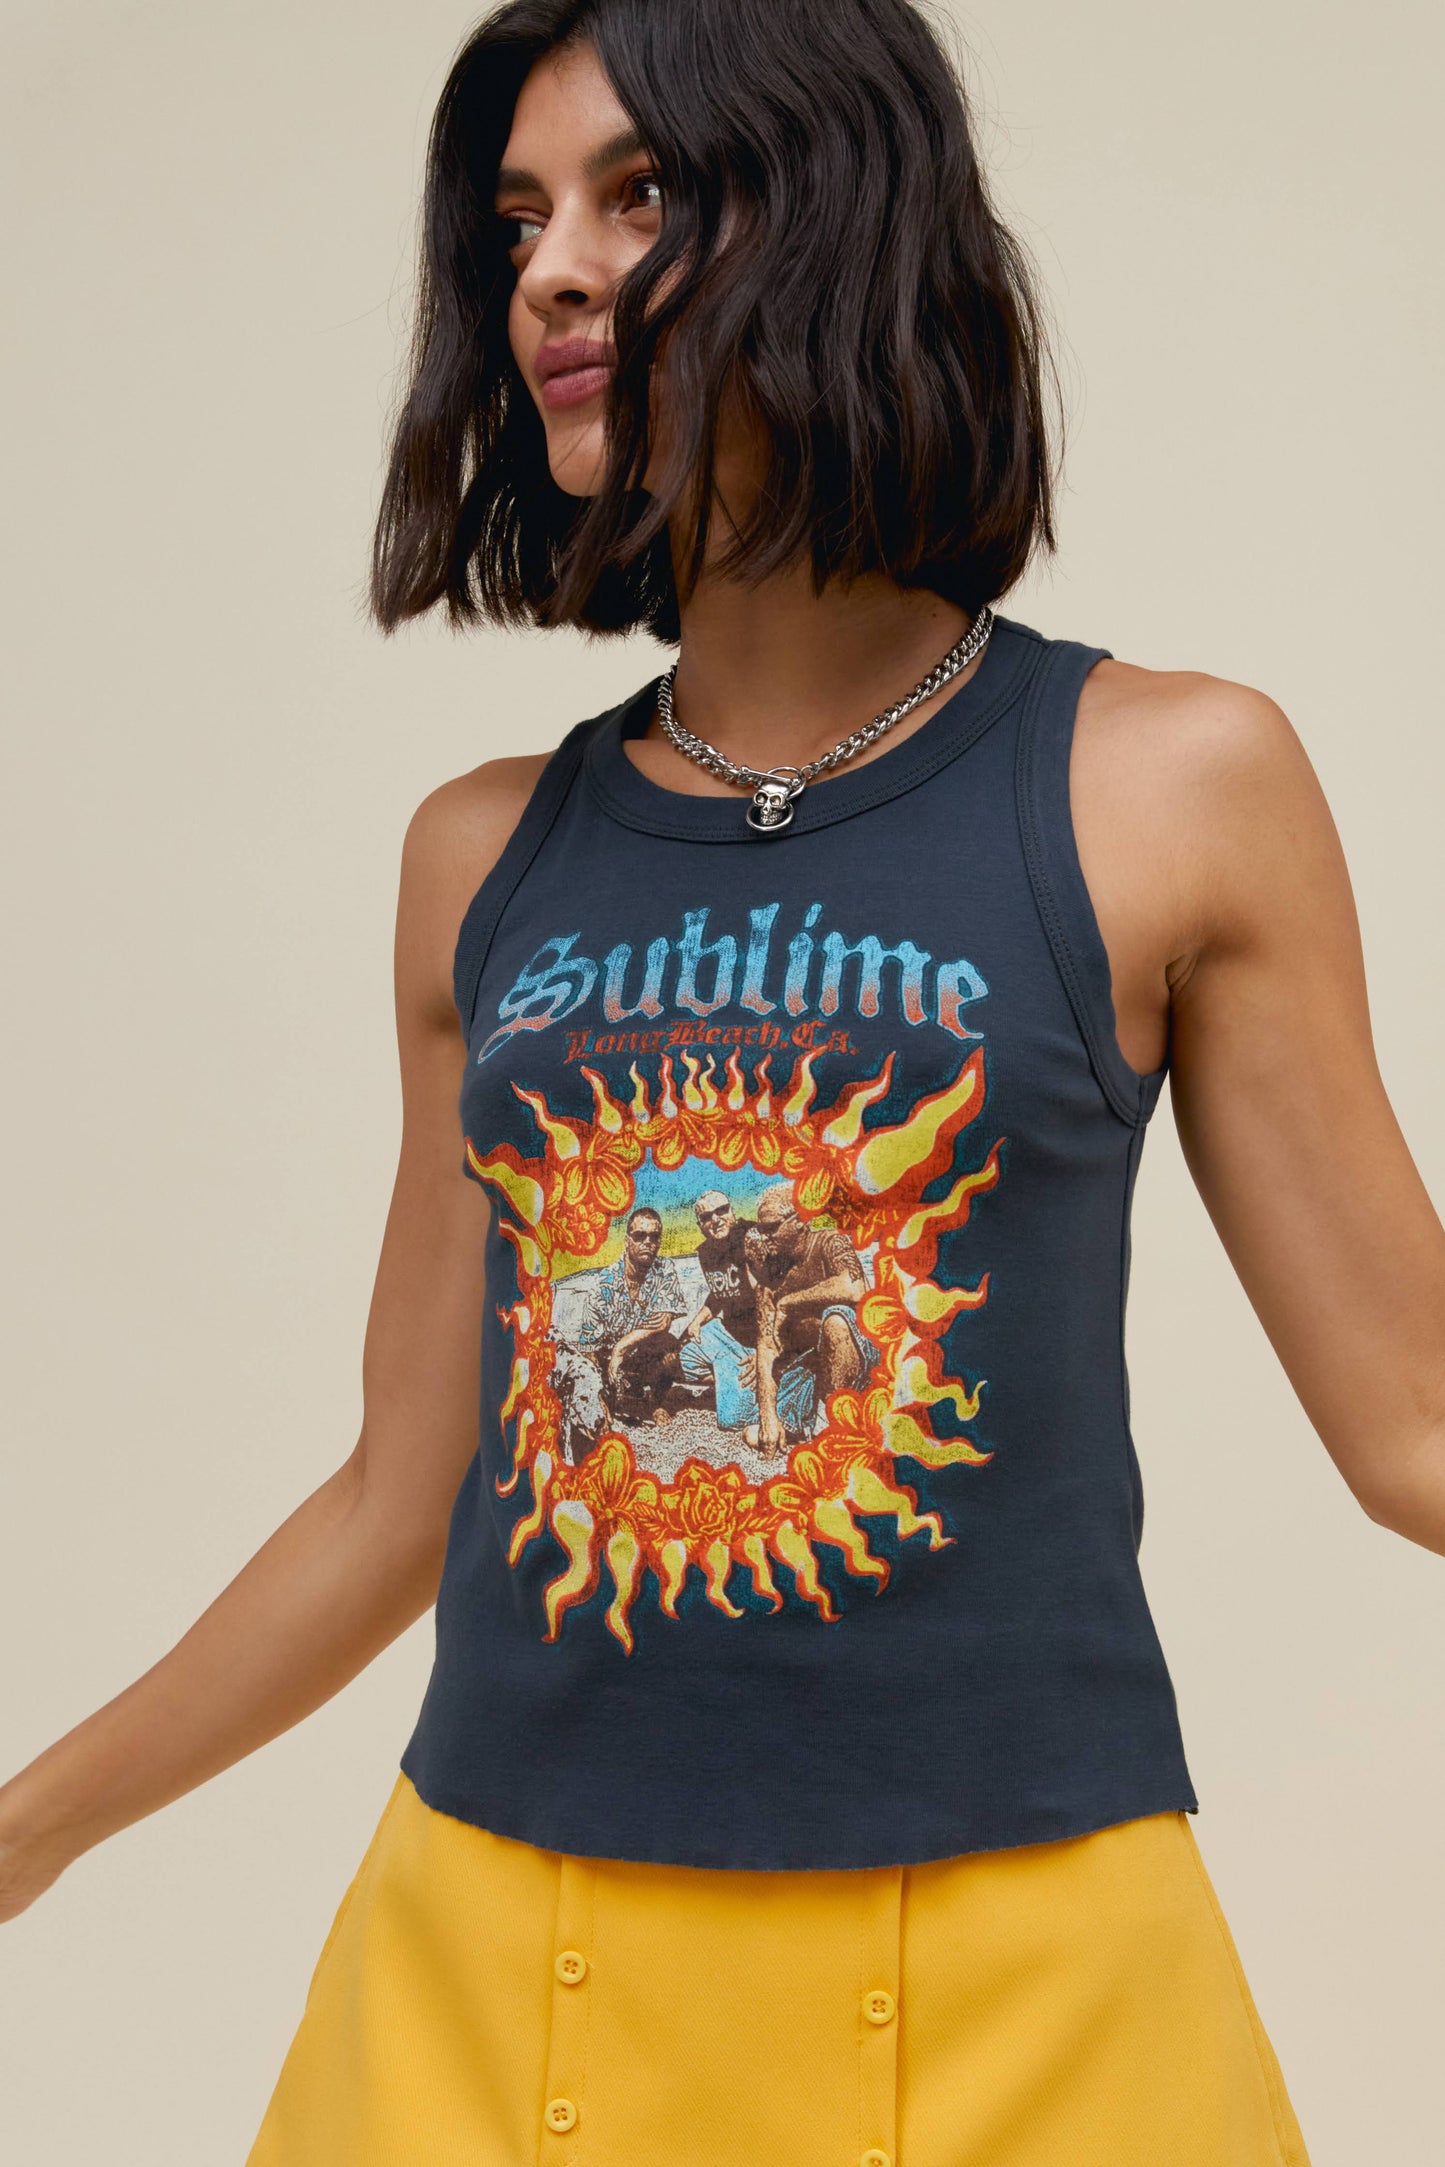 Dark haired model featuring Sublime's logo and hometown top chest.